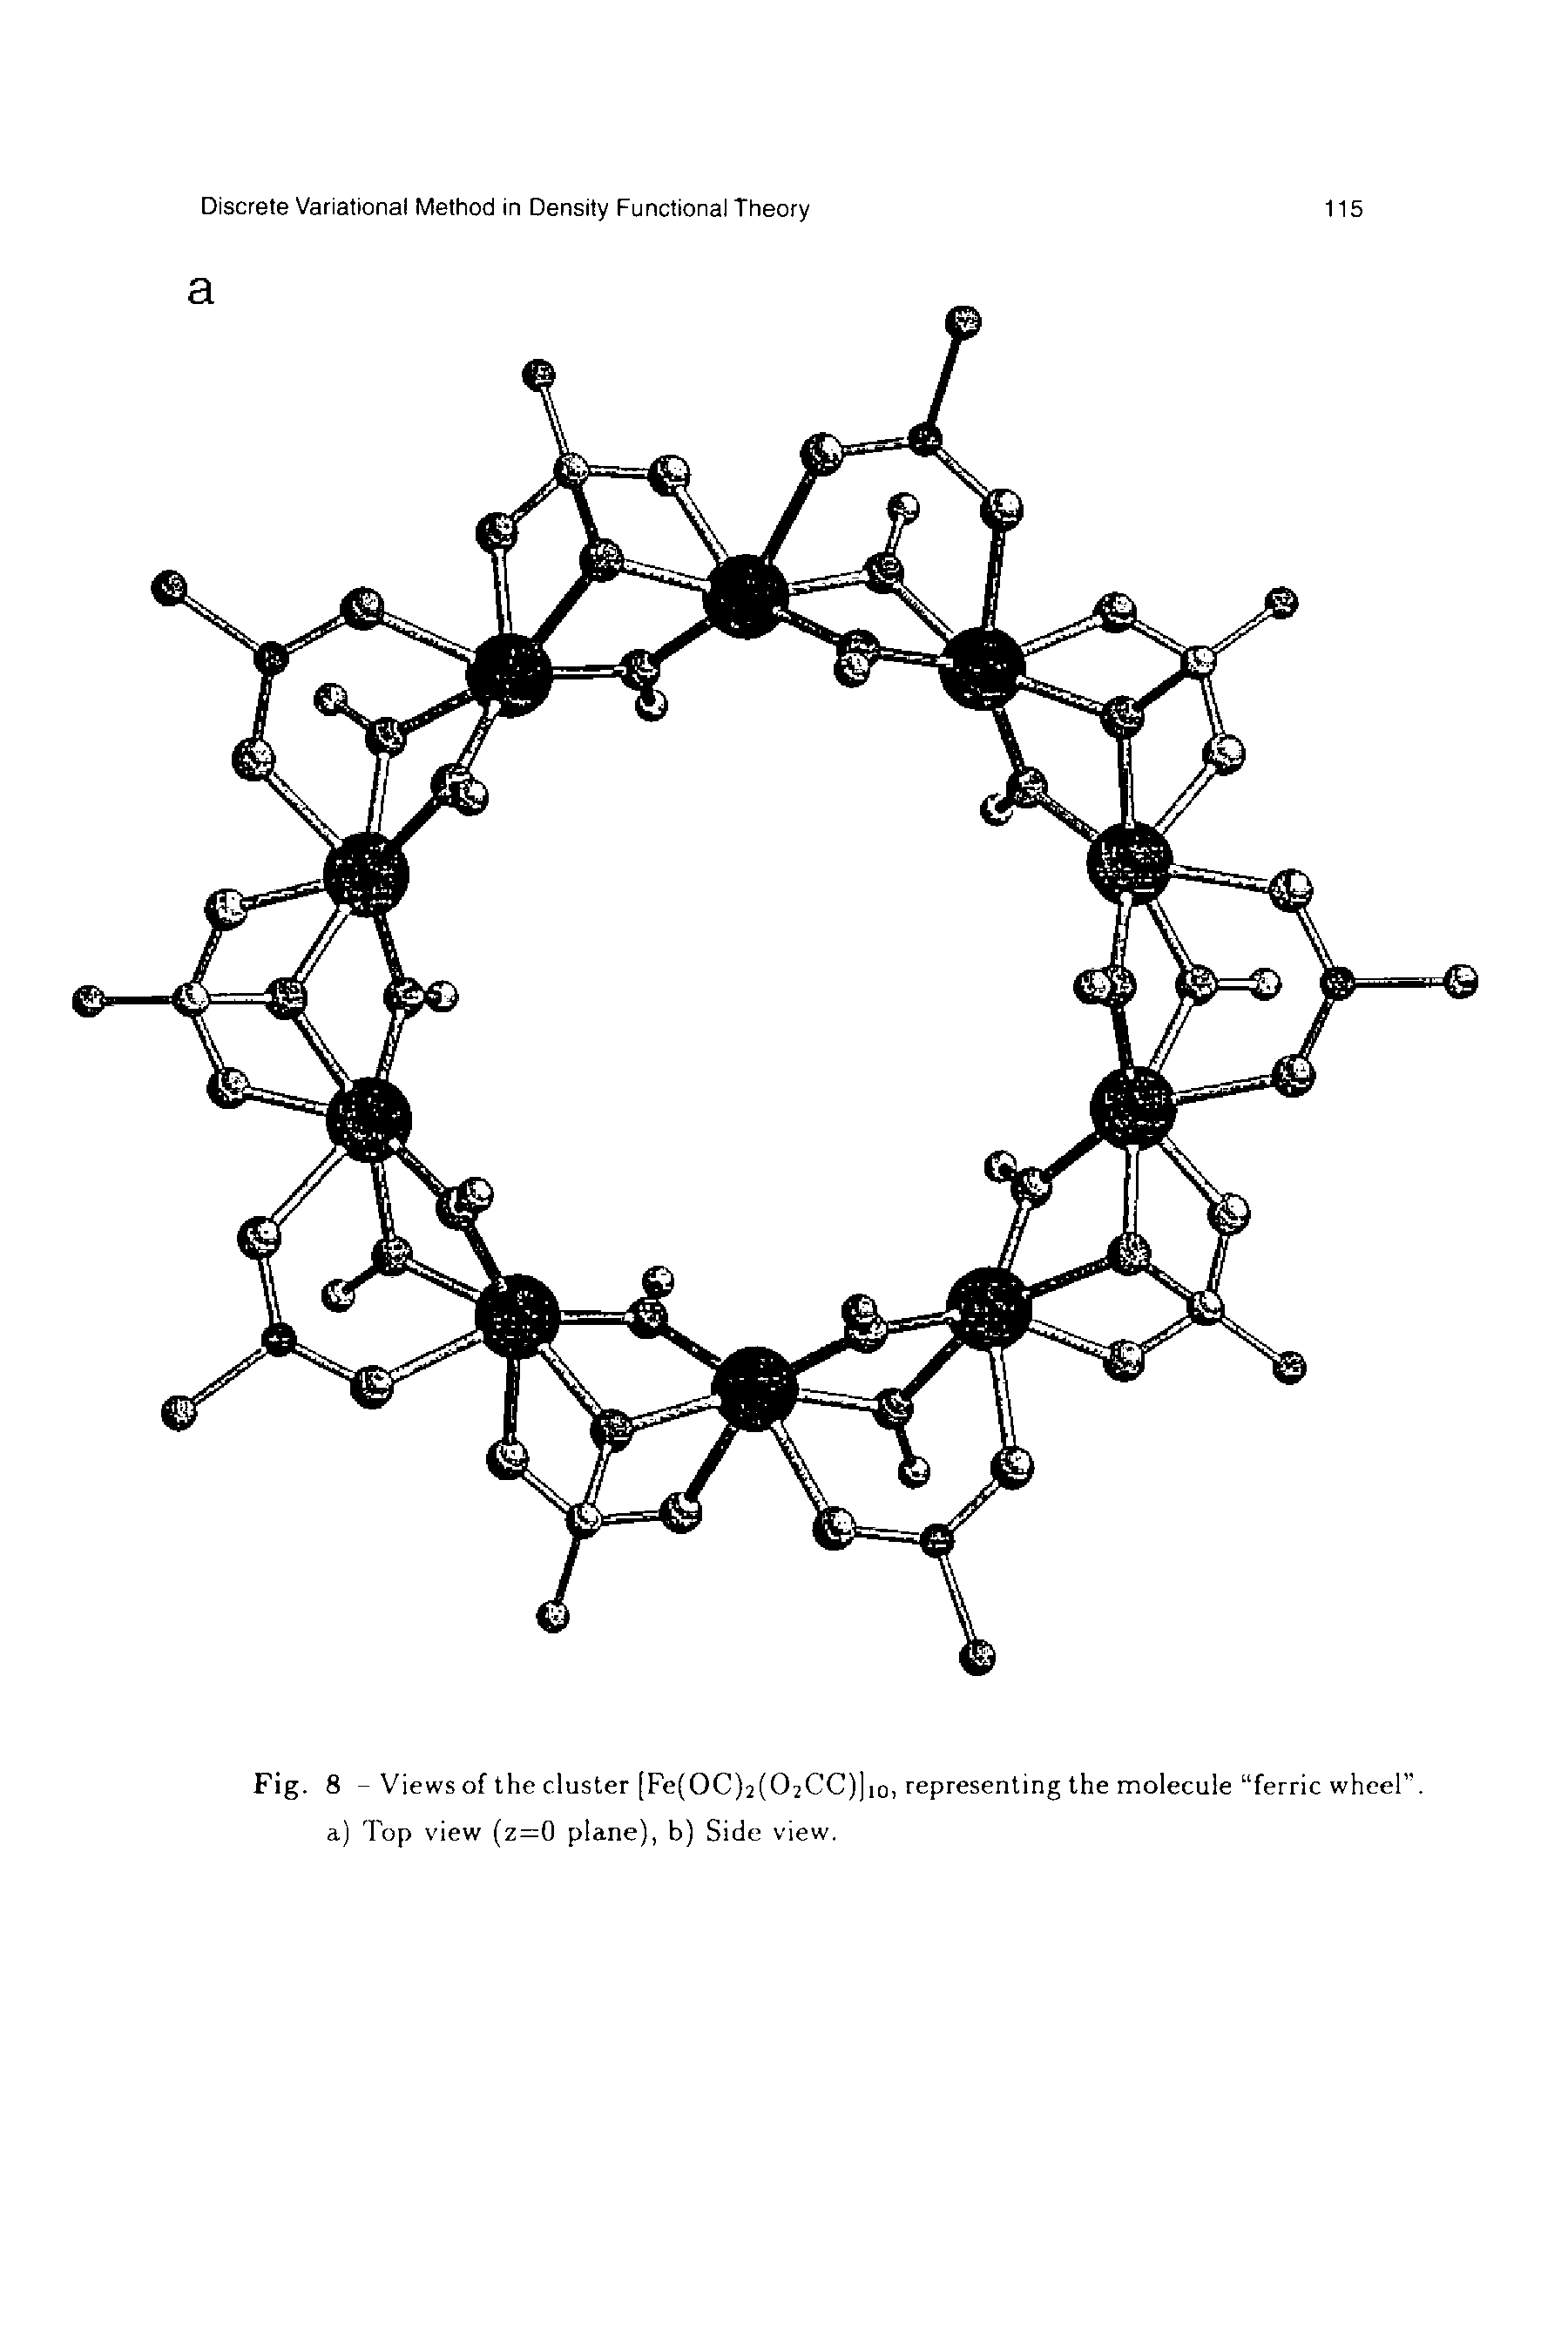 Fig. 8 - Views of the cluster (Fe(OC)2(02CC))io, representing the molecule ferric wheel a) Top view (z=0 plane), b) Side view.